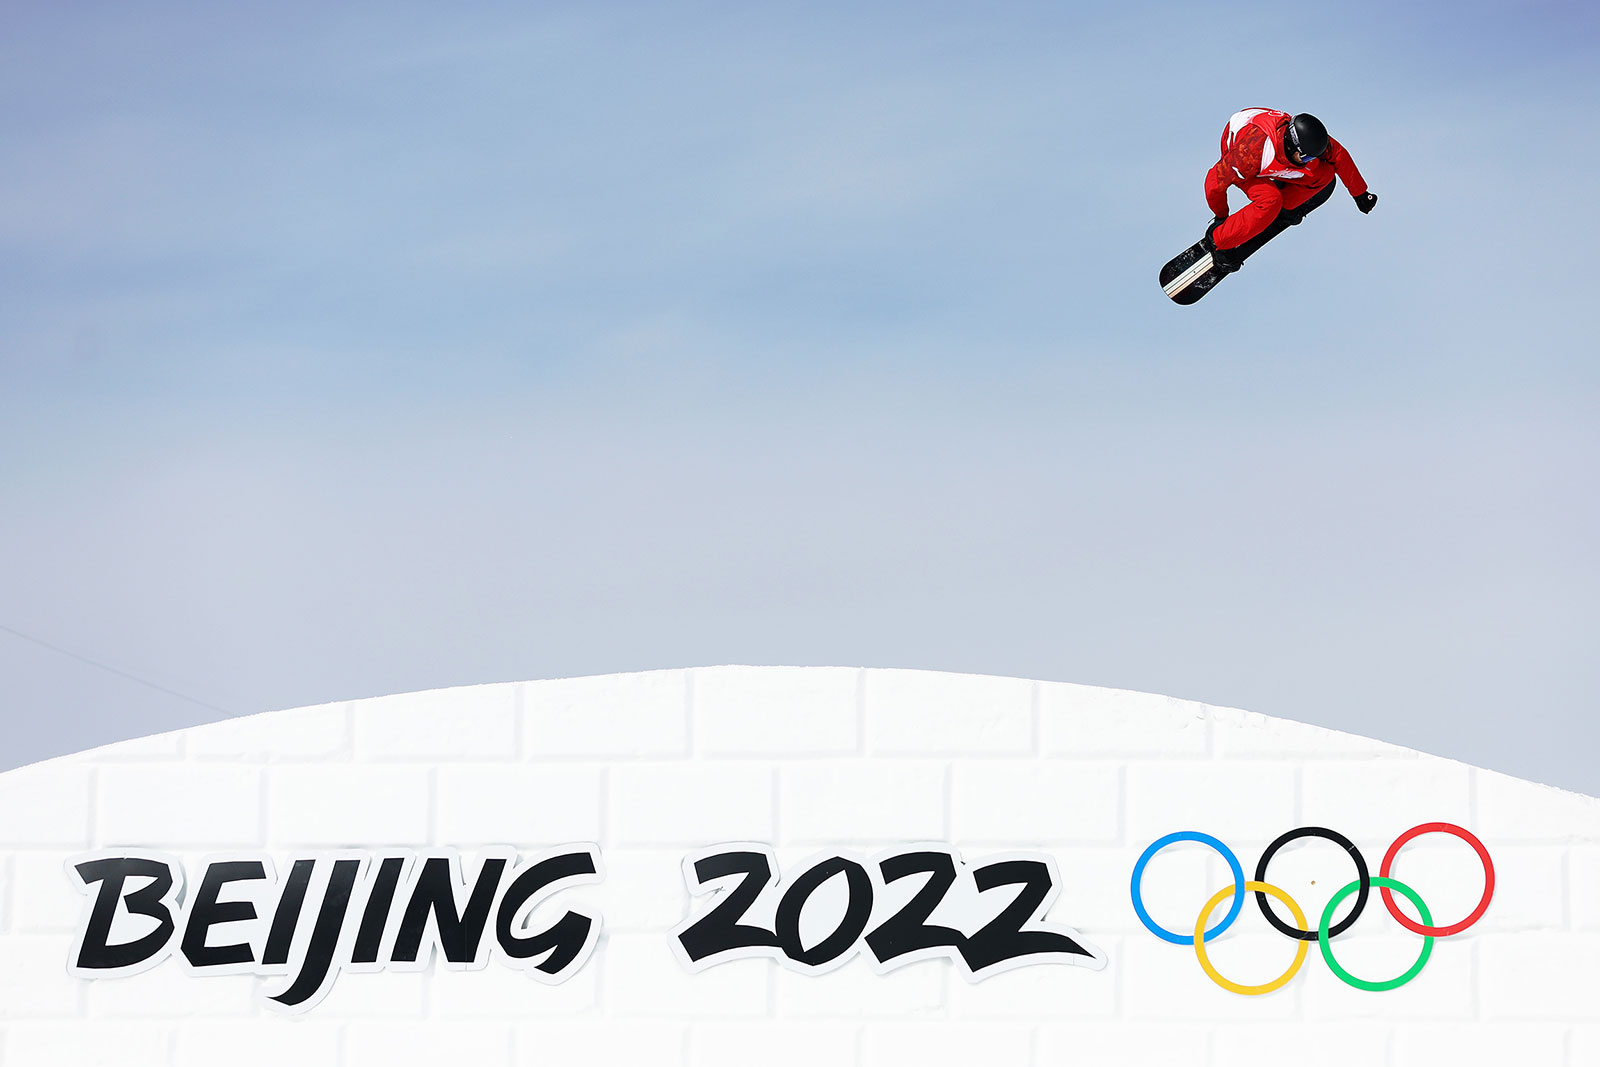 Canadian snowboarder Max Parrot performs a trick during the men's slopestyle final on February 7.